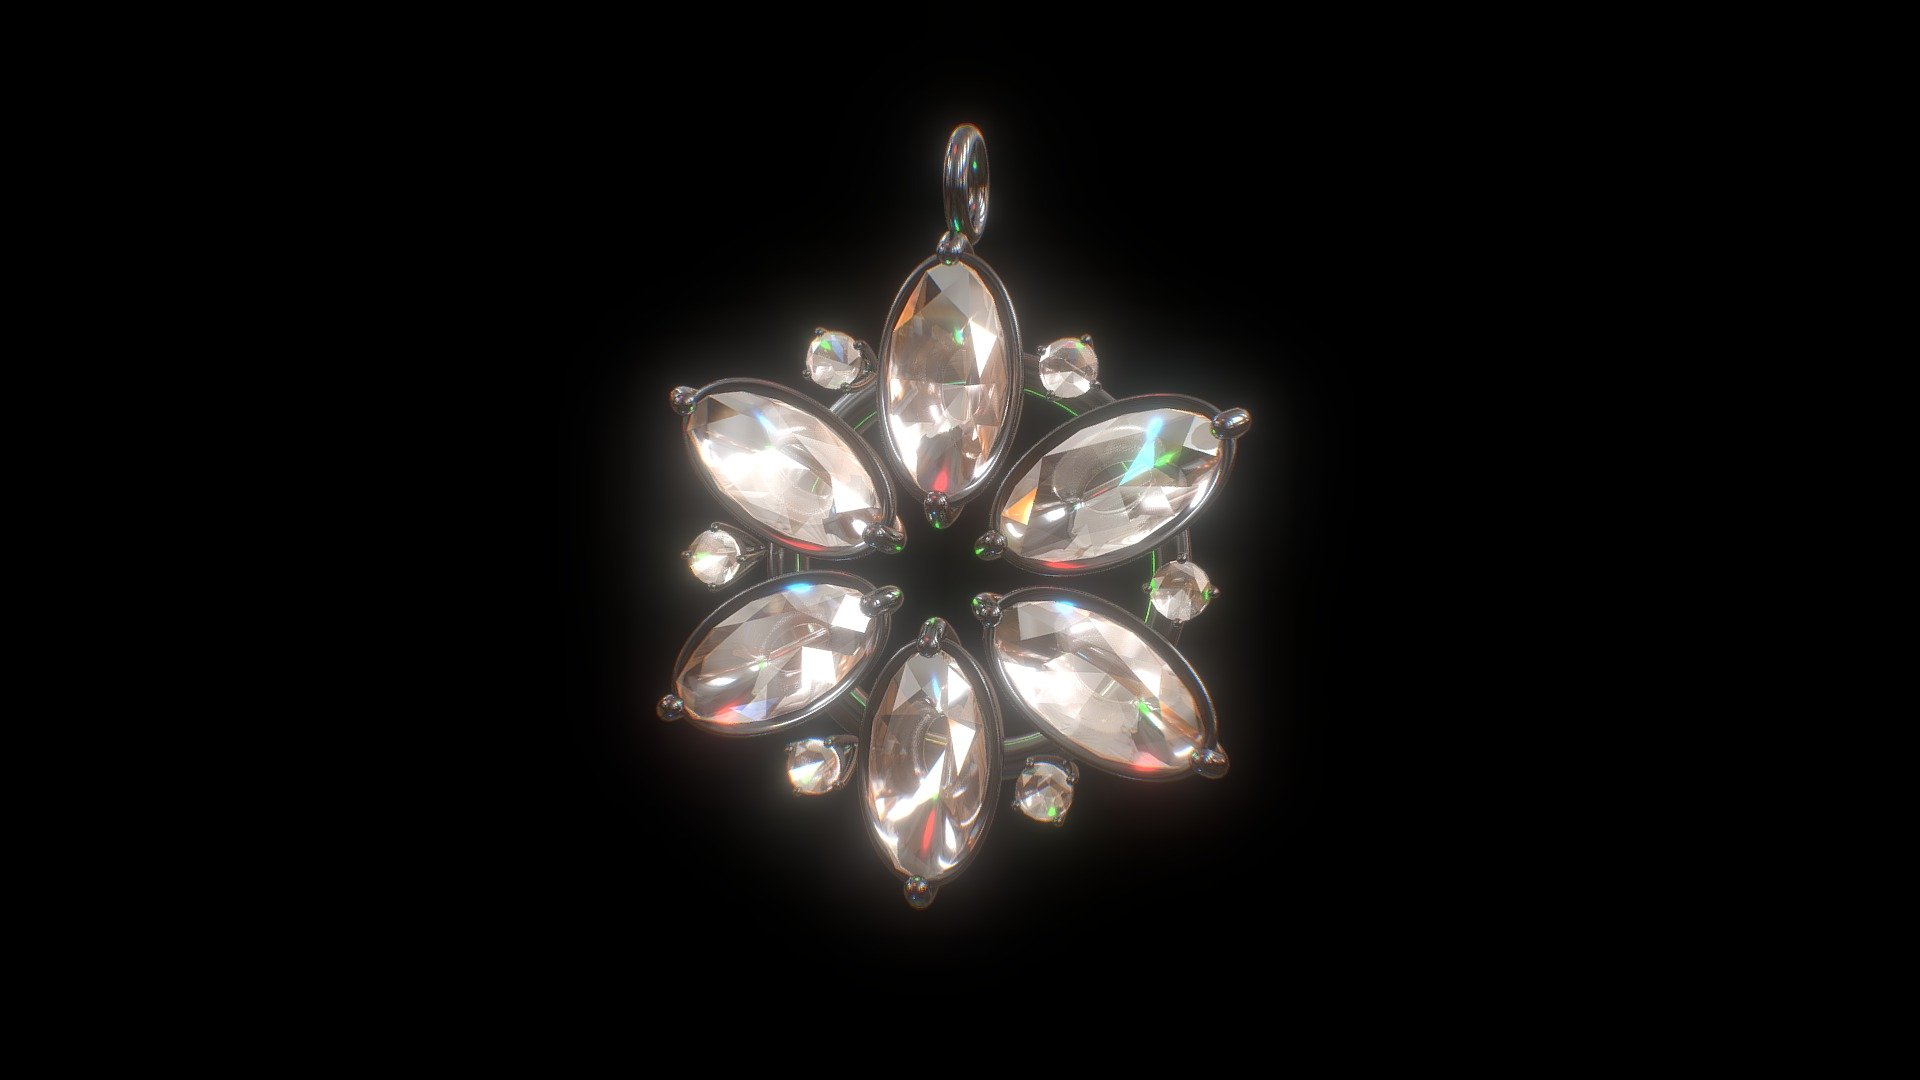 Follow me on my Insta

This 3D model is recreated from this video - Snowflake Necklace - Download Free 3D model by powerdoge 3d model